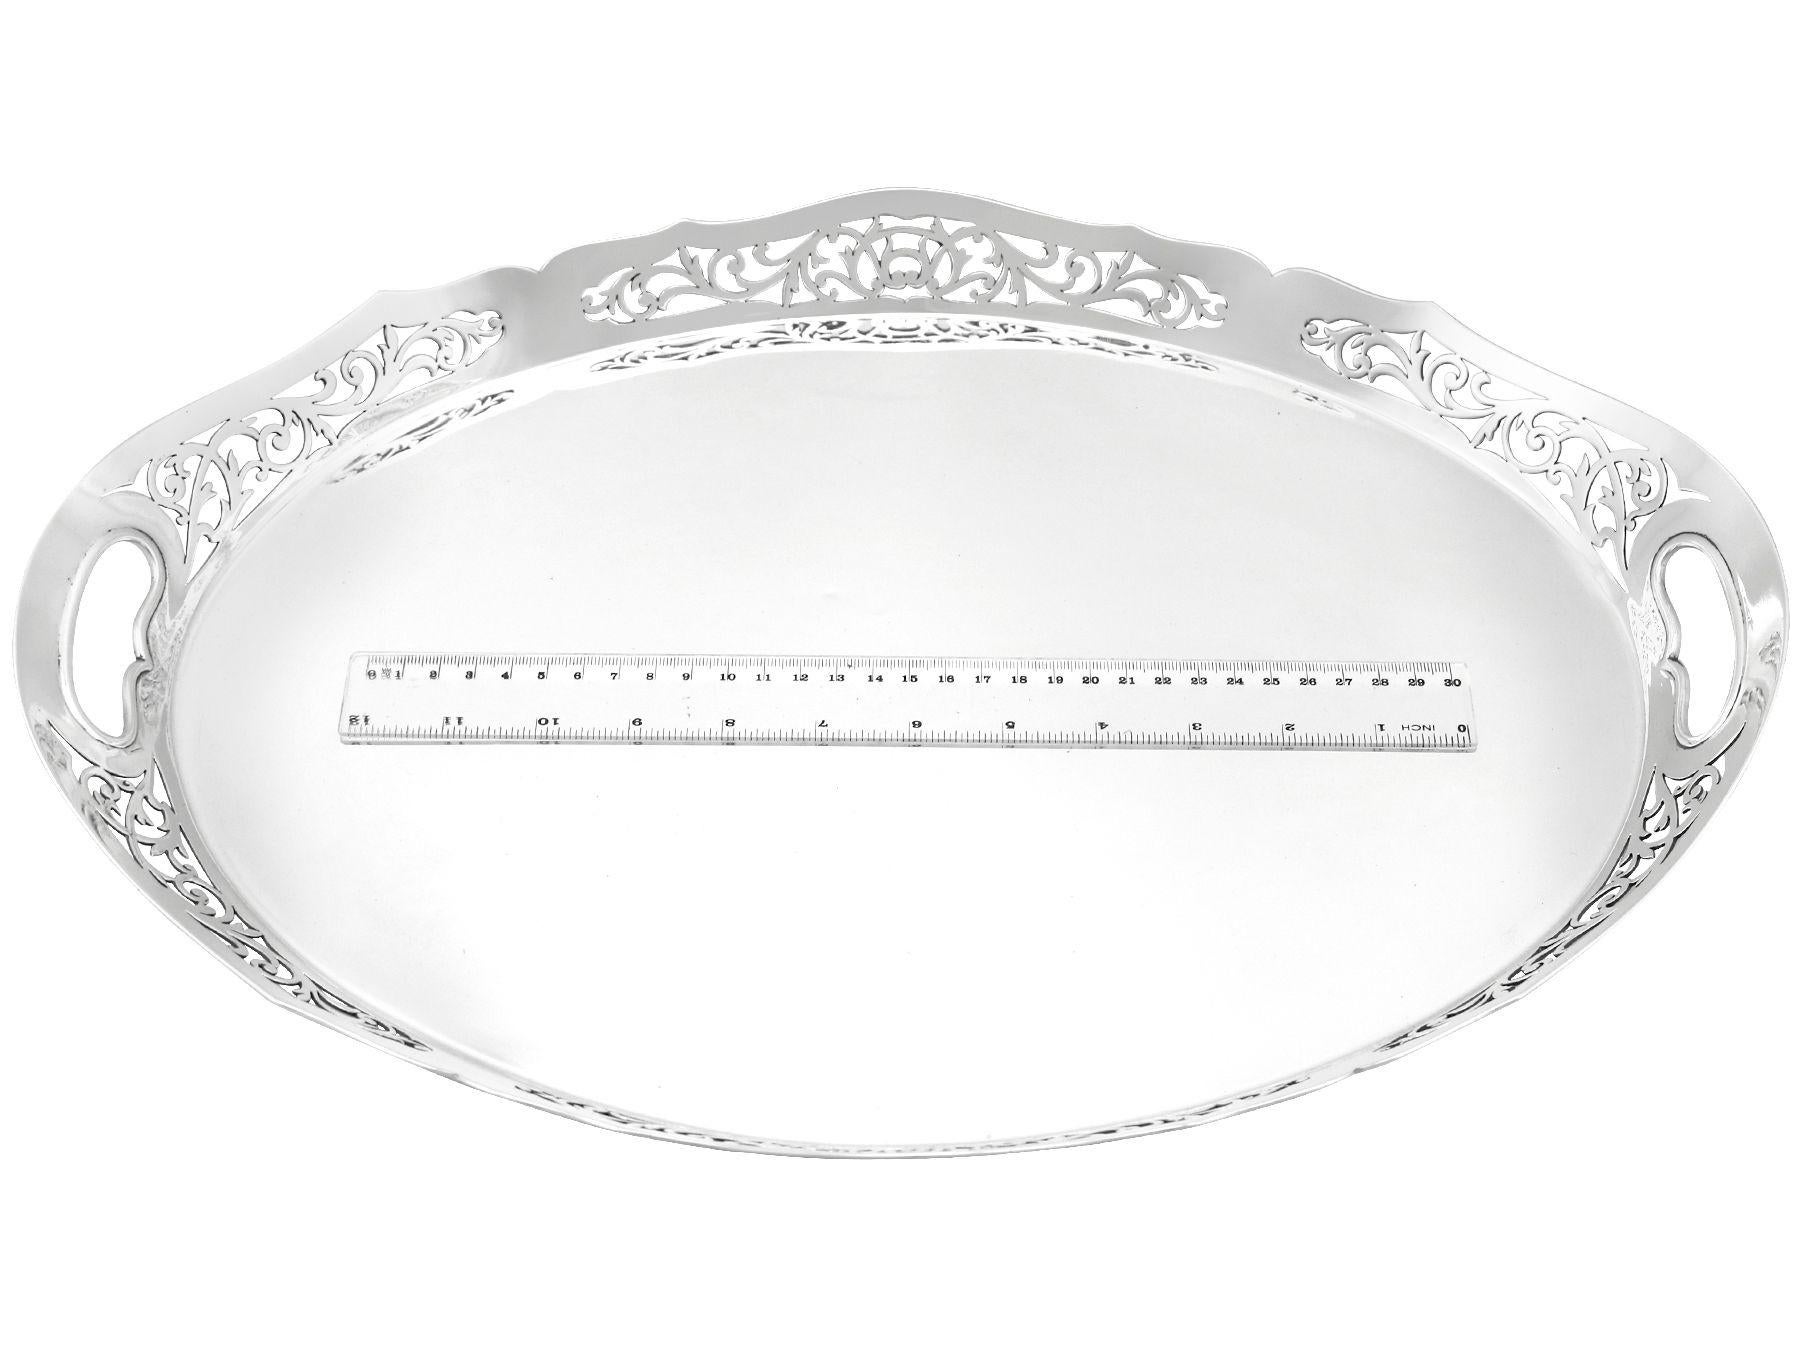 Mappin & Webb Ltd Antique 1923 Sterling Silver Gallery Tray For Sale 3